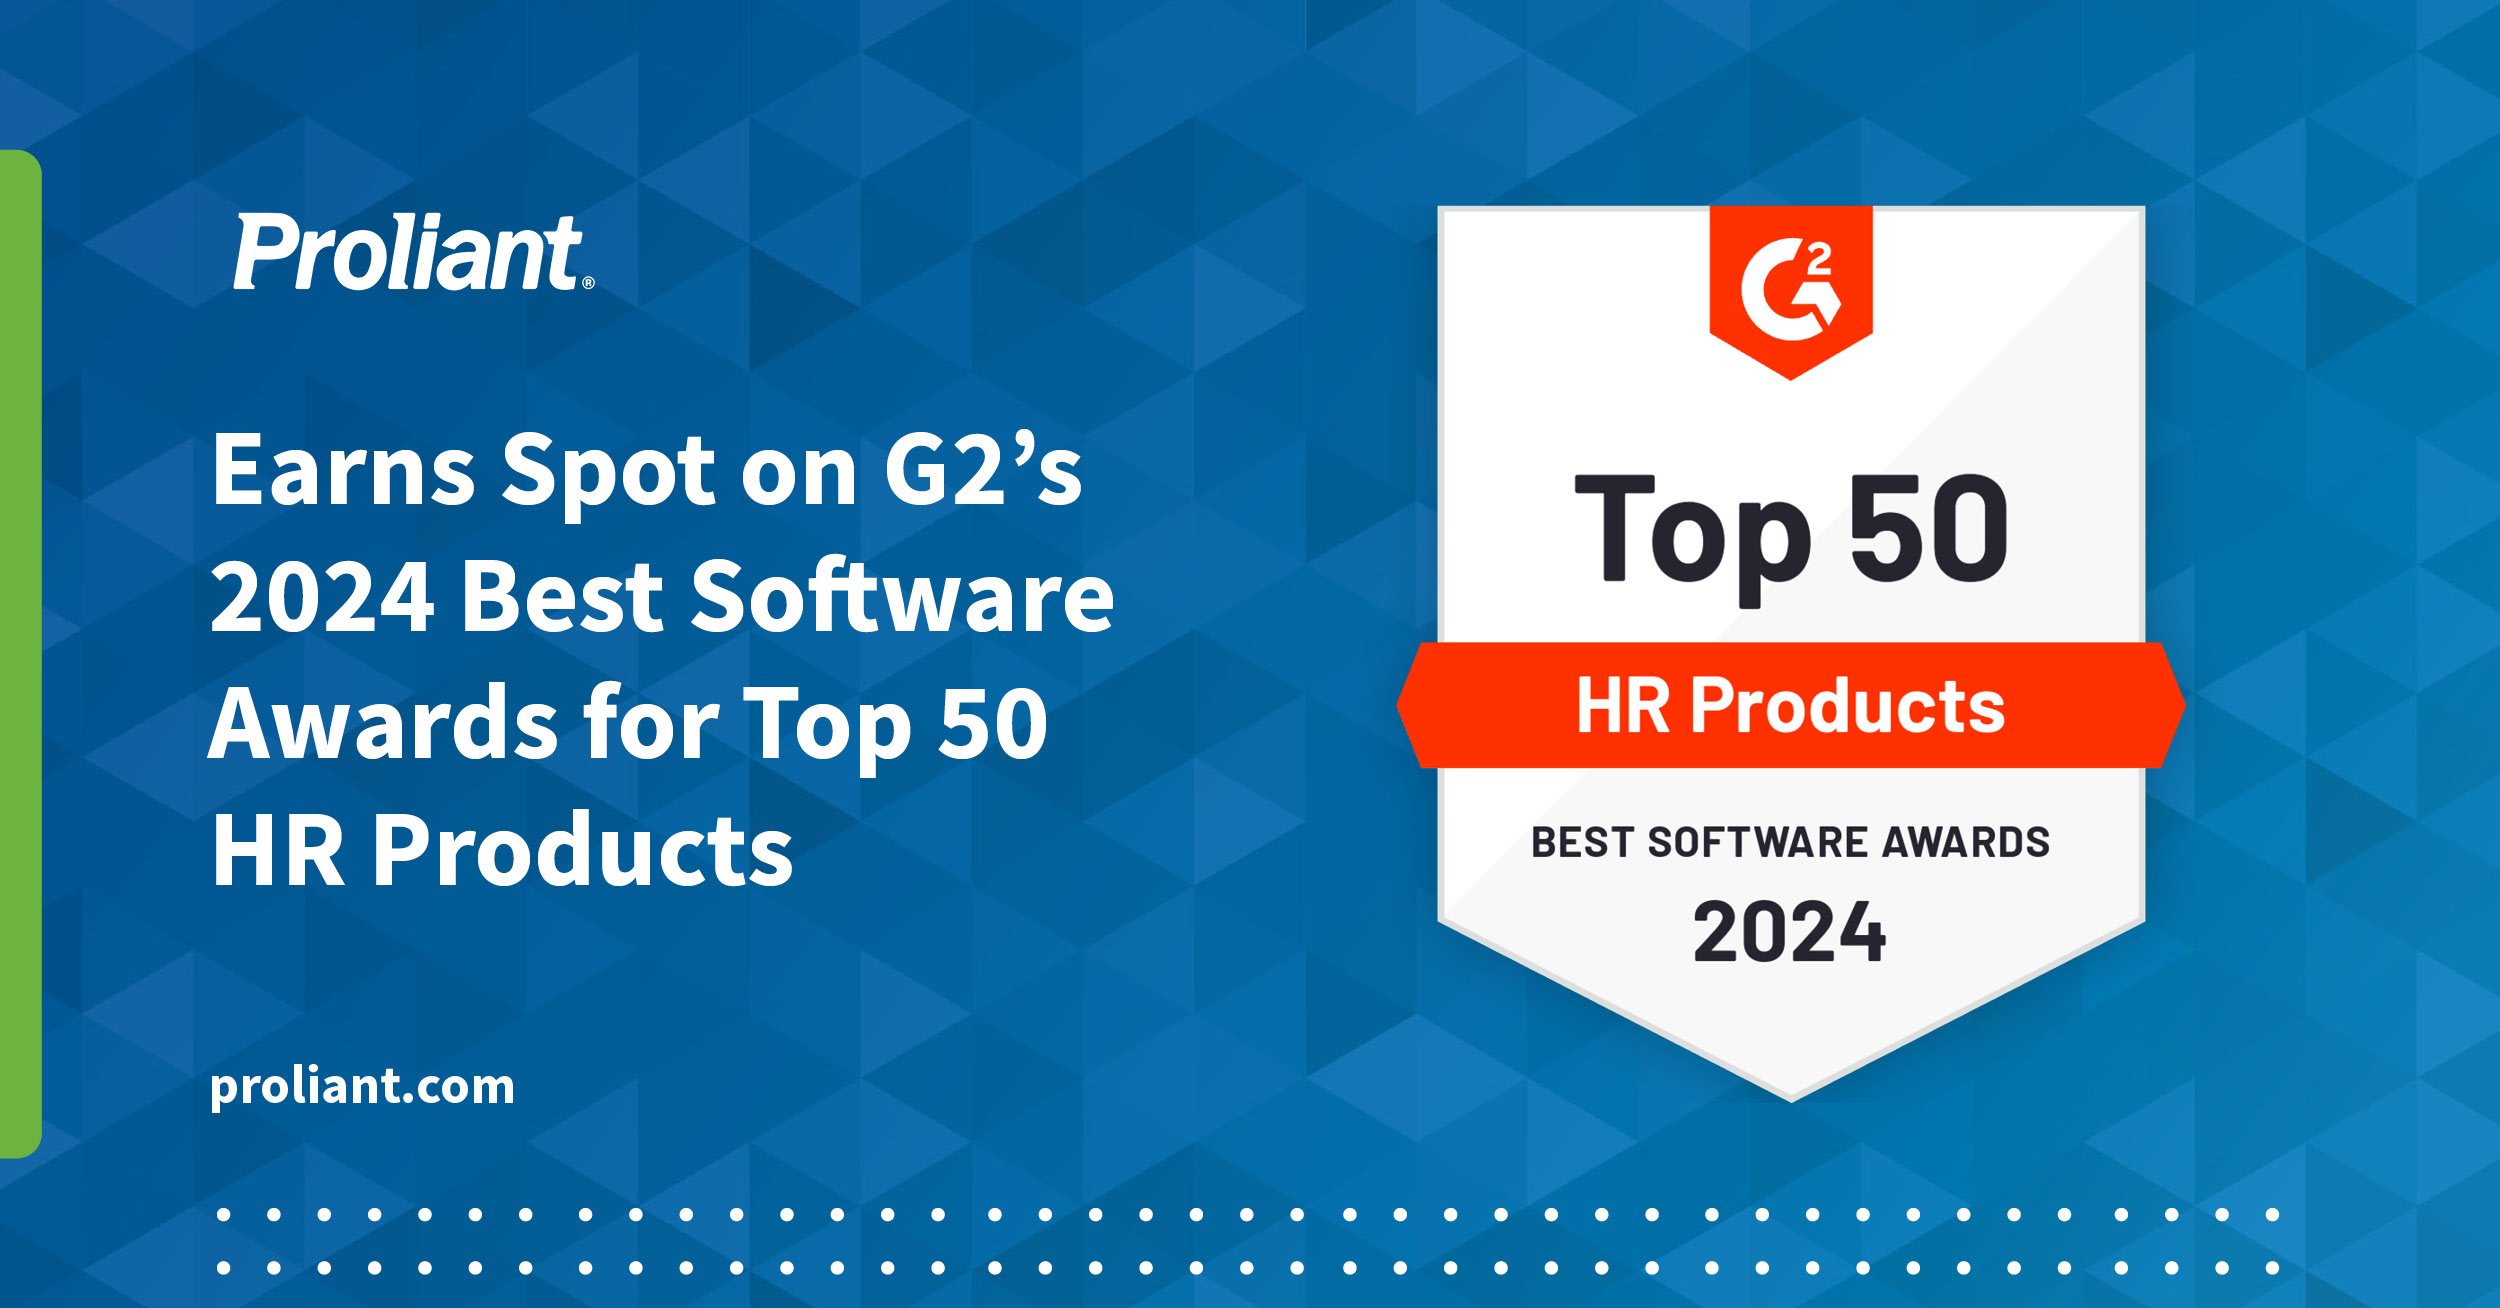 Proliant Named 2024 Best Software for HR Products